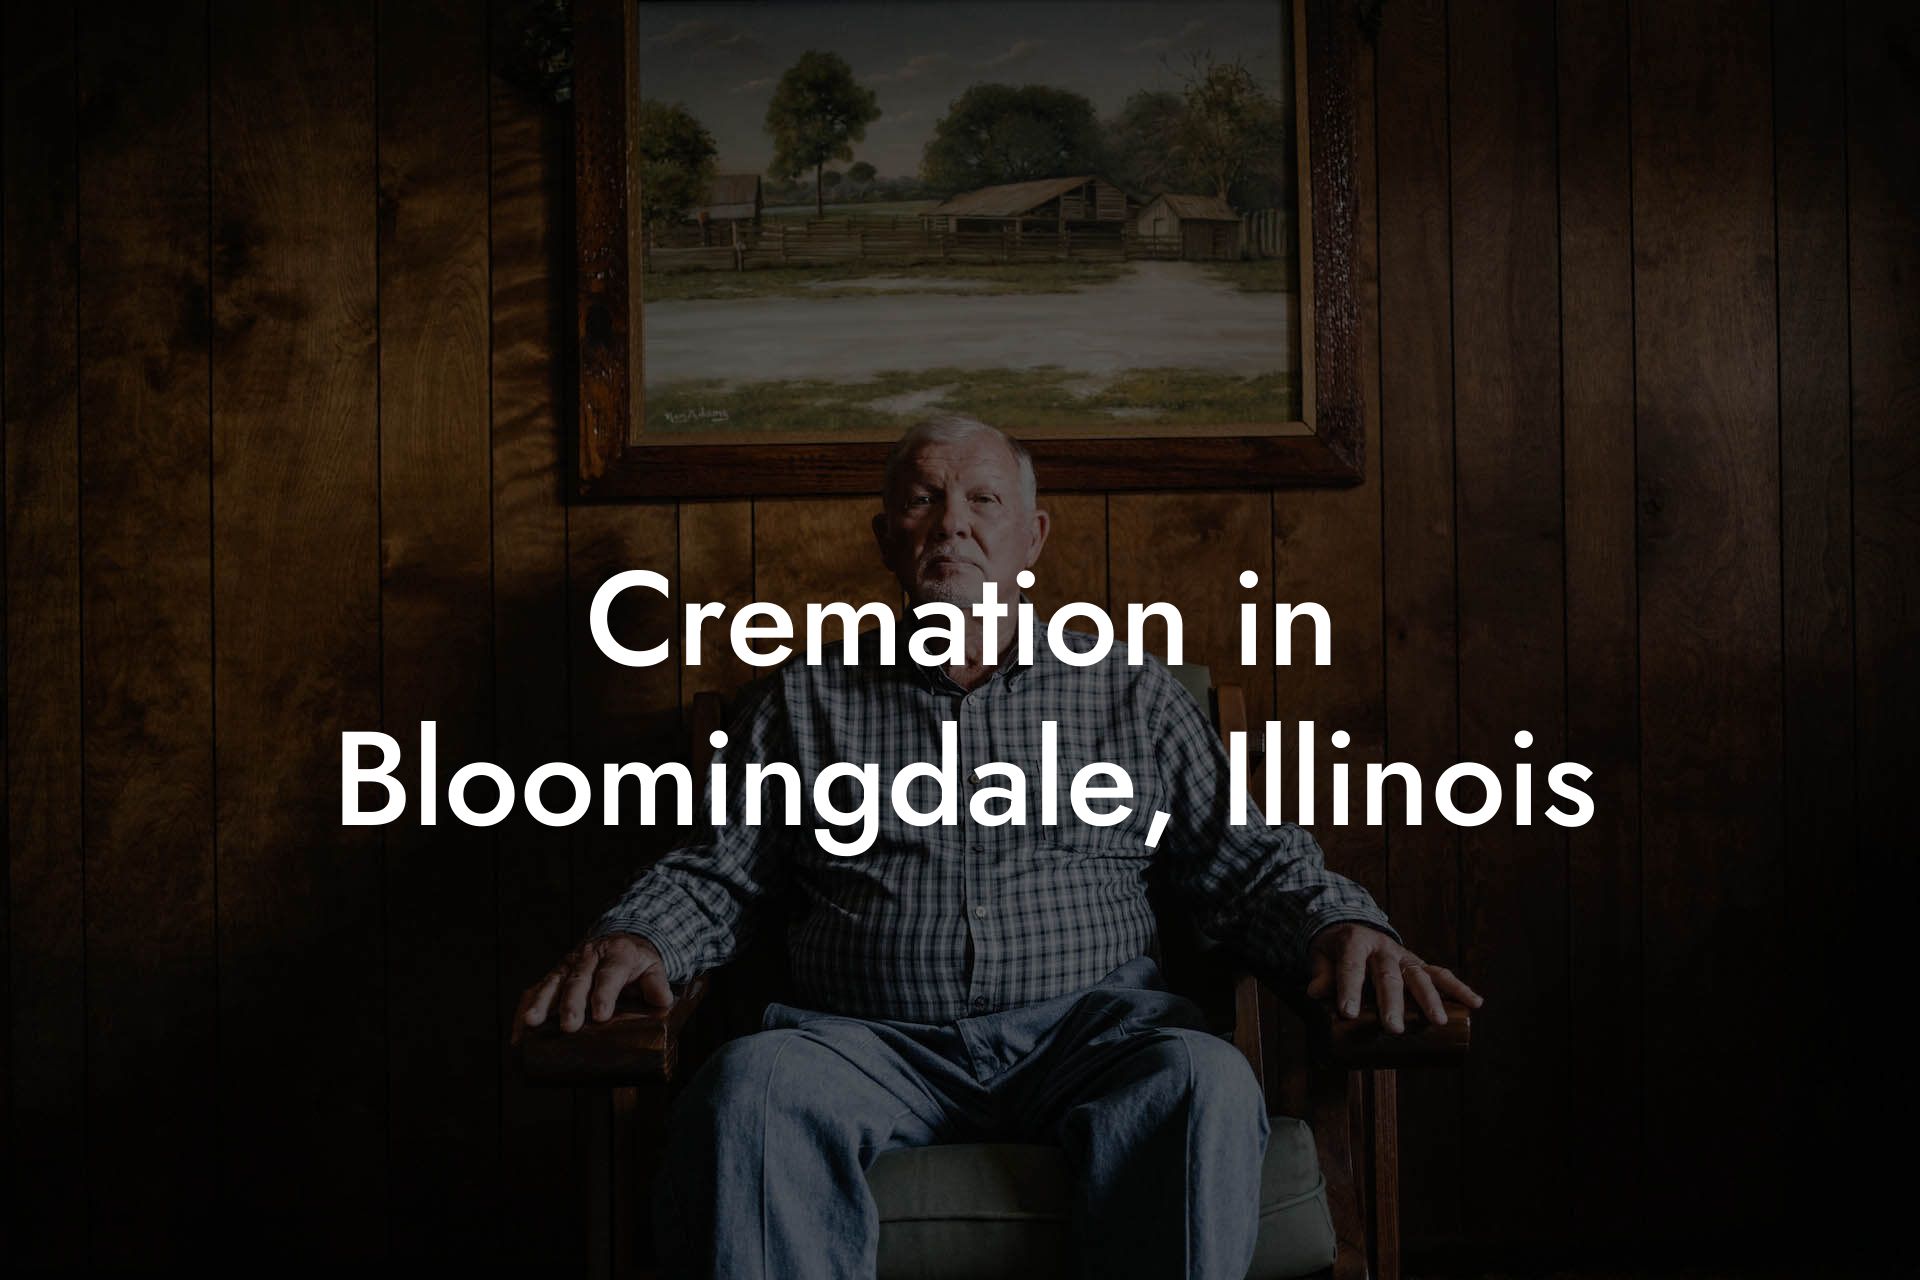 Cremation in Bloomingdale, Illinois